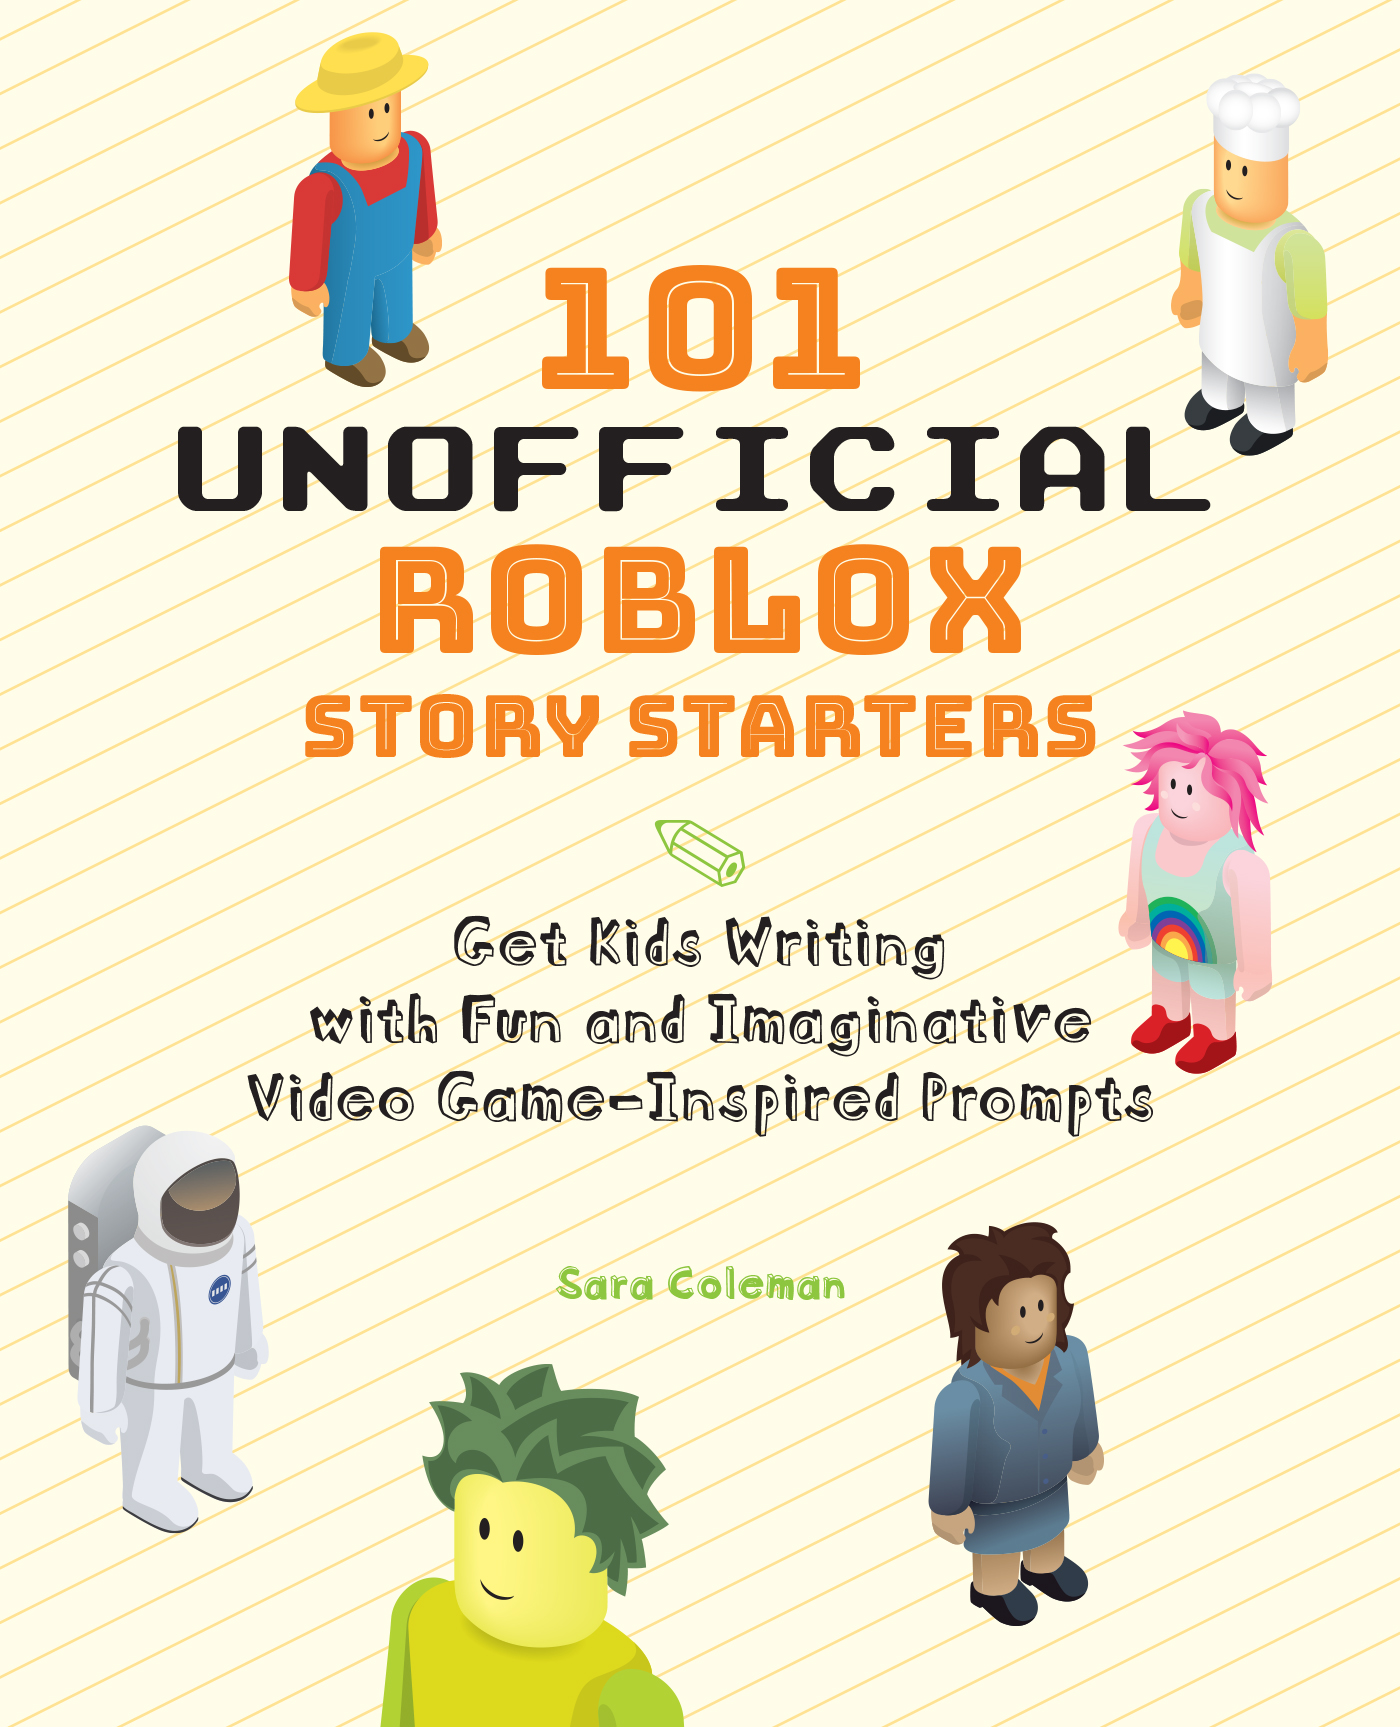 101 Unofficial Roblox Story Starters Ulysses Press - roblox facts for kids